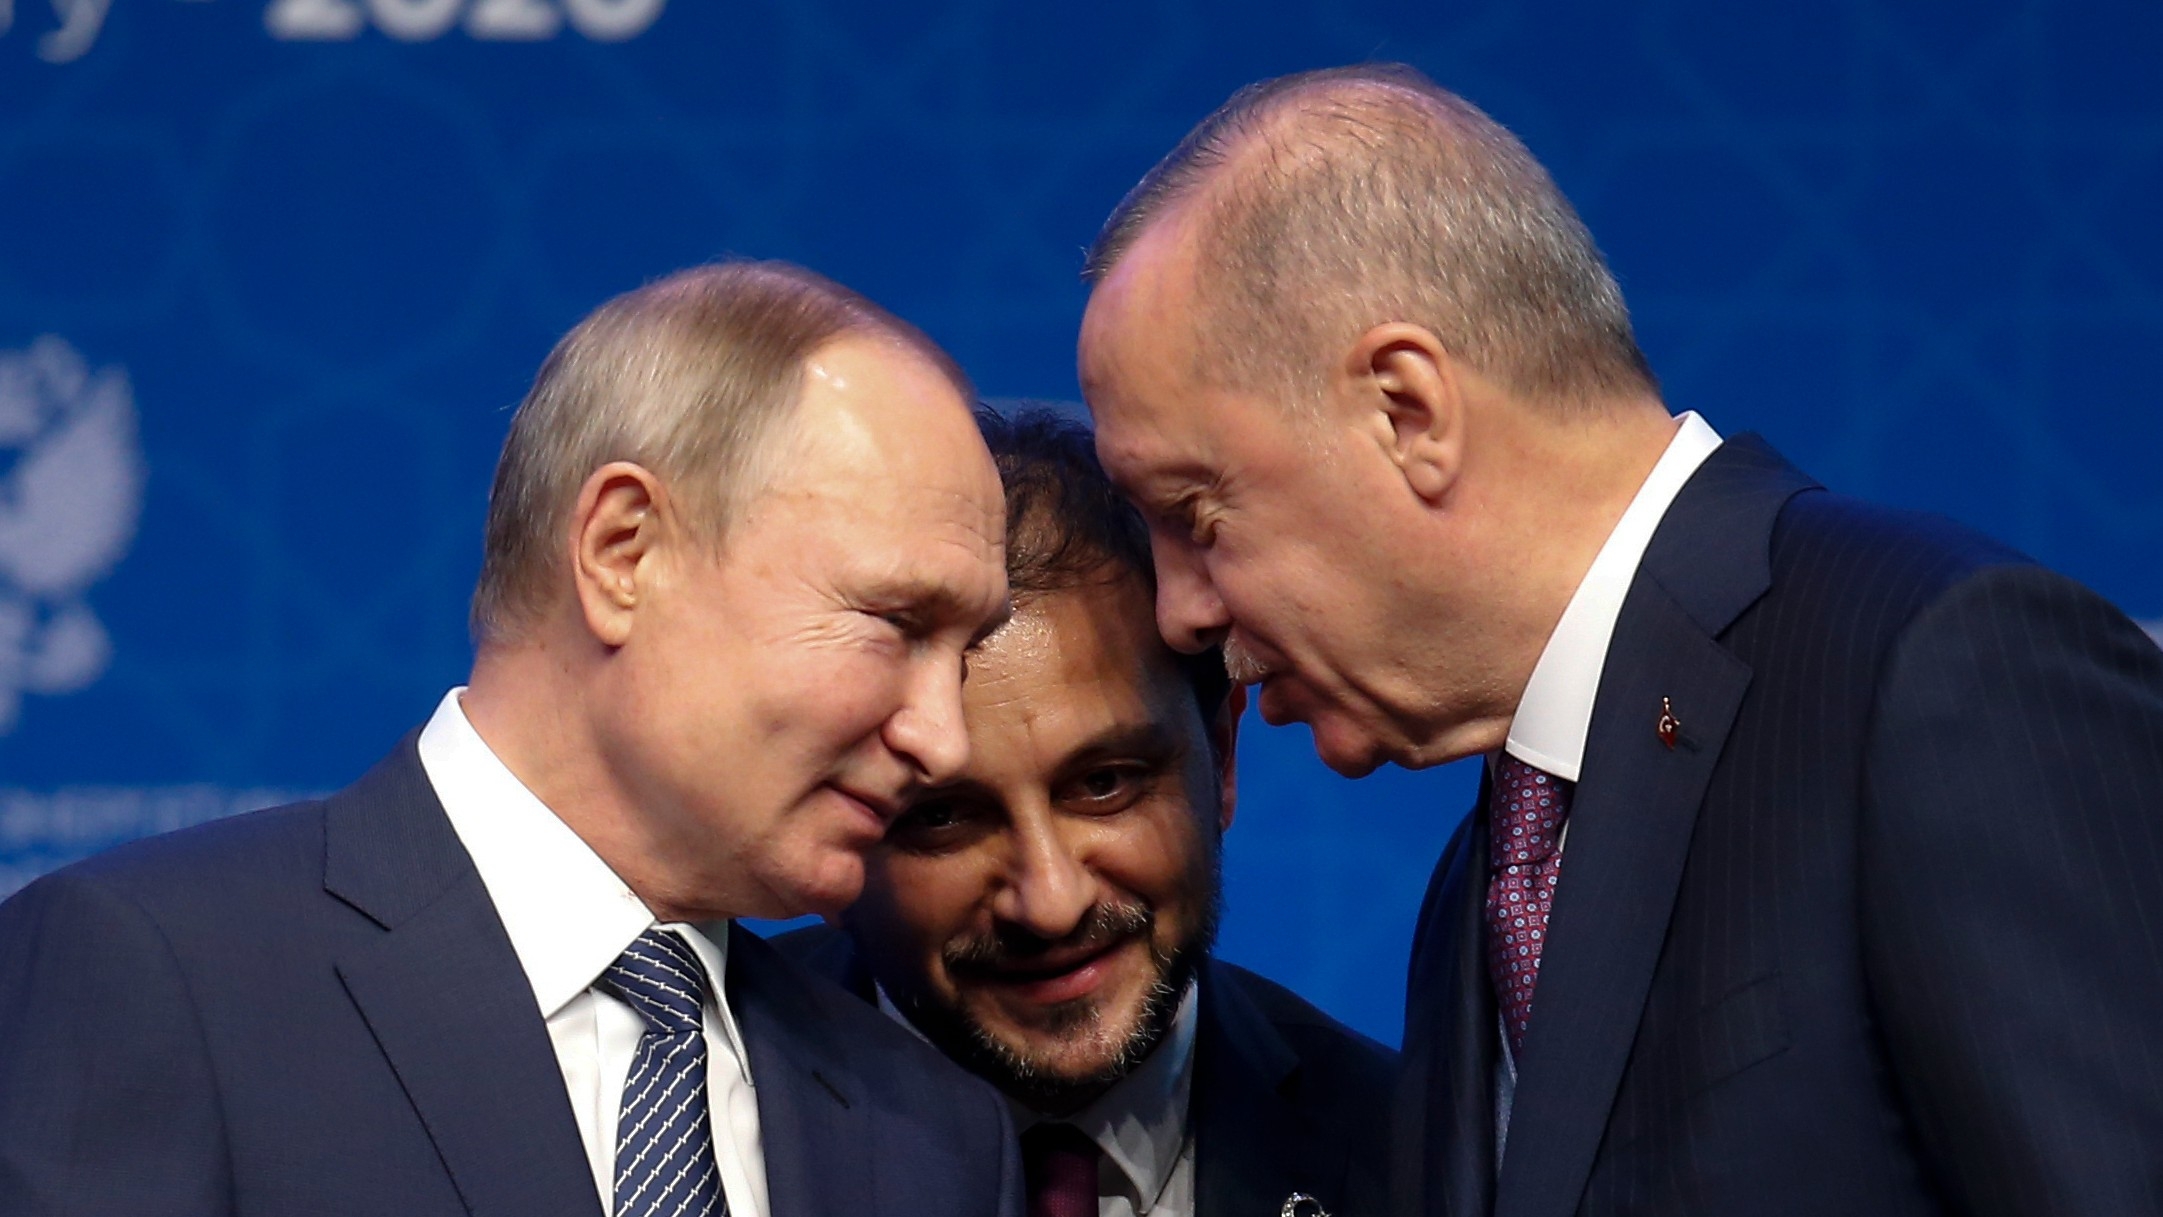 Turkey's President Recep Tayyip Erdogan, right and Russia's President Vladimir Putin, left, talk during a ceremony in Istanbul for the inauguration of the TurkStream pipeline in 2020 (AP)